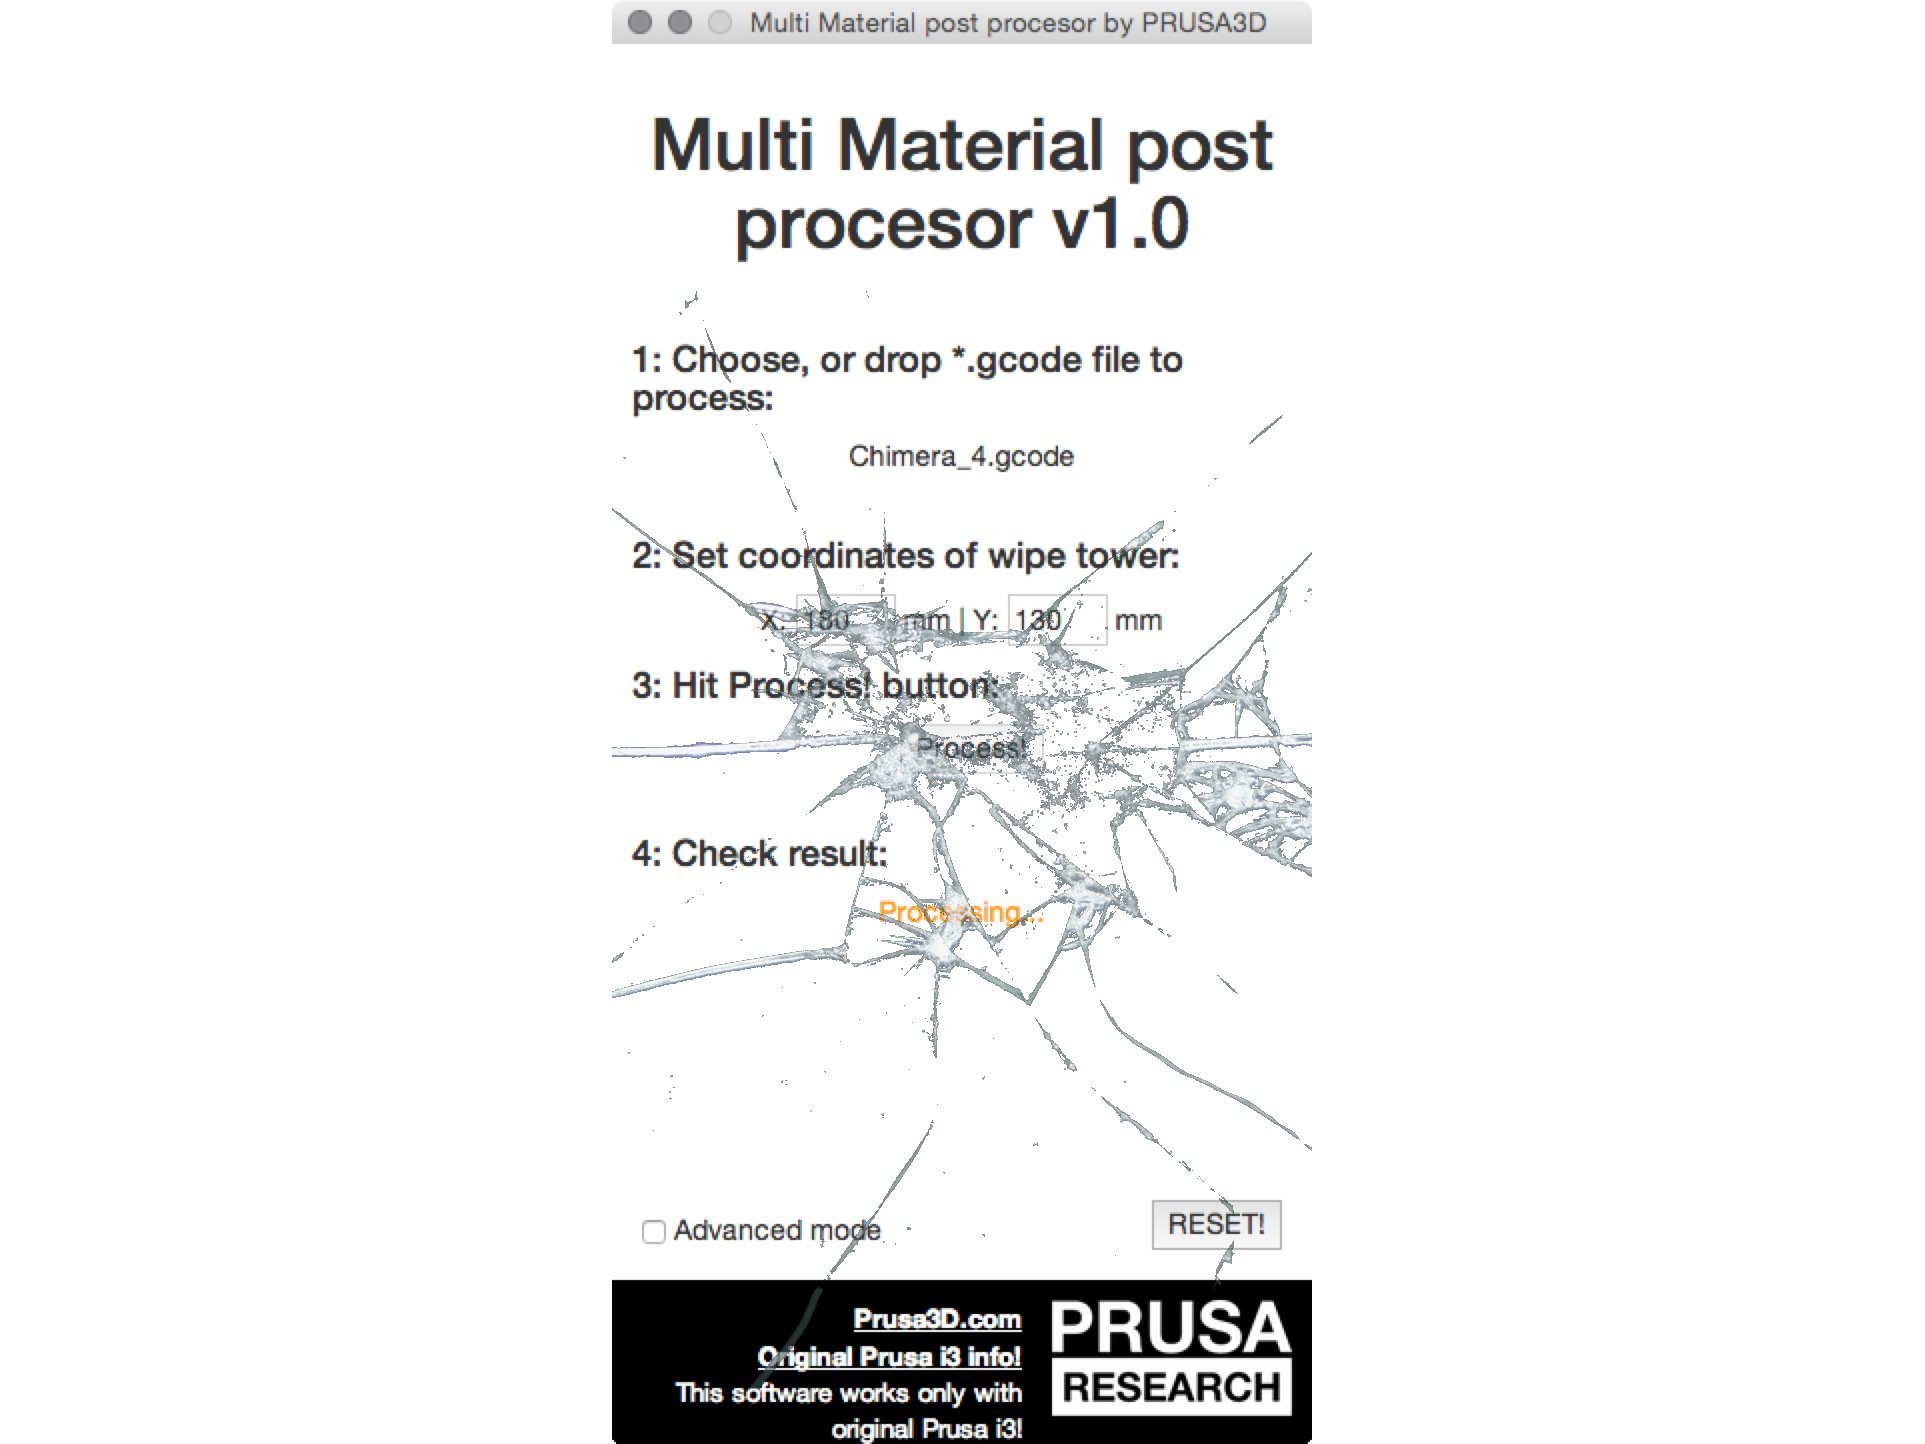 Multi Material Post Processor Troubleshooting